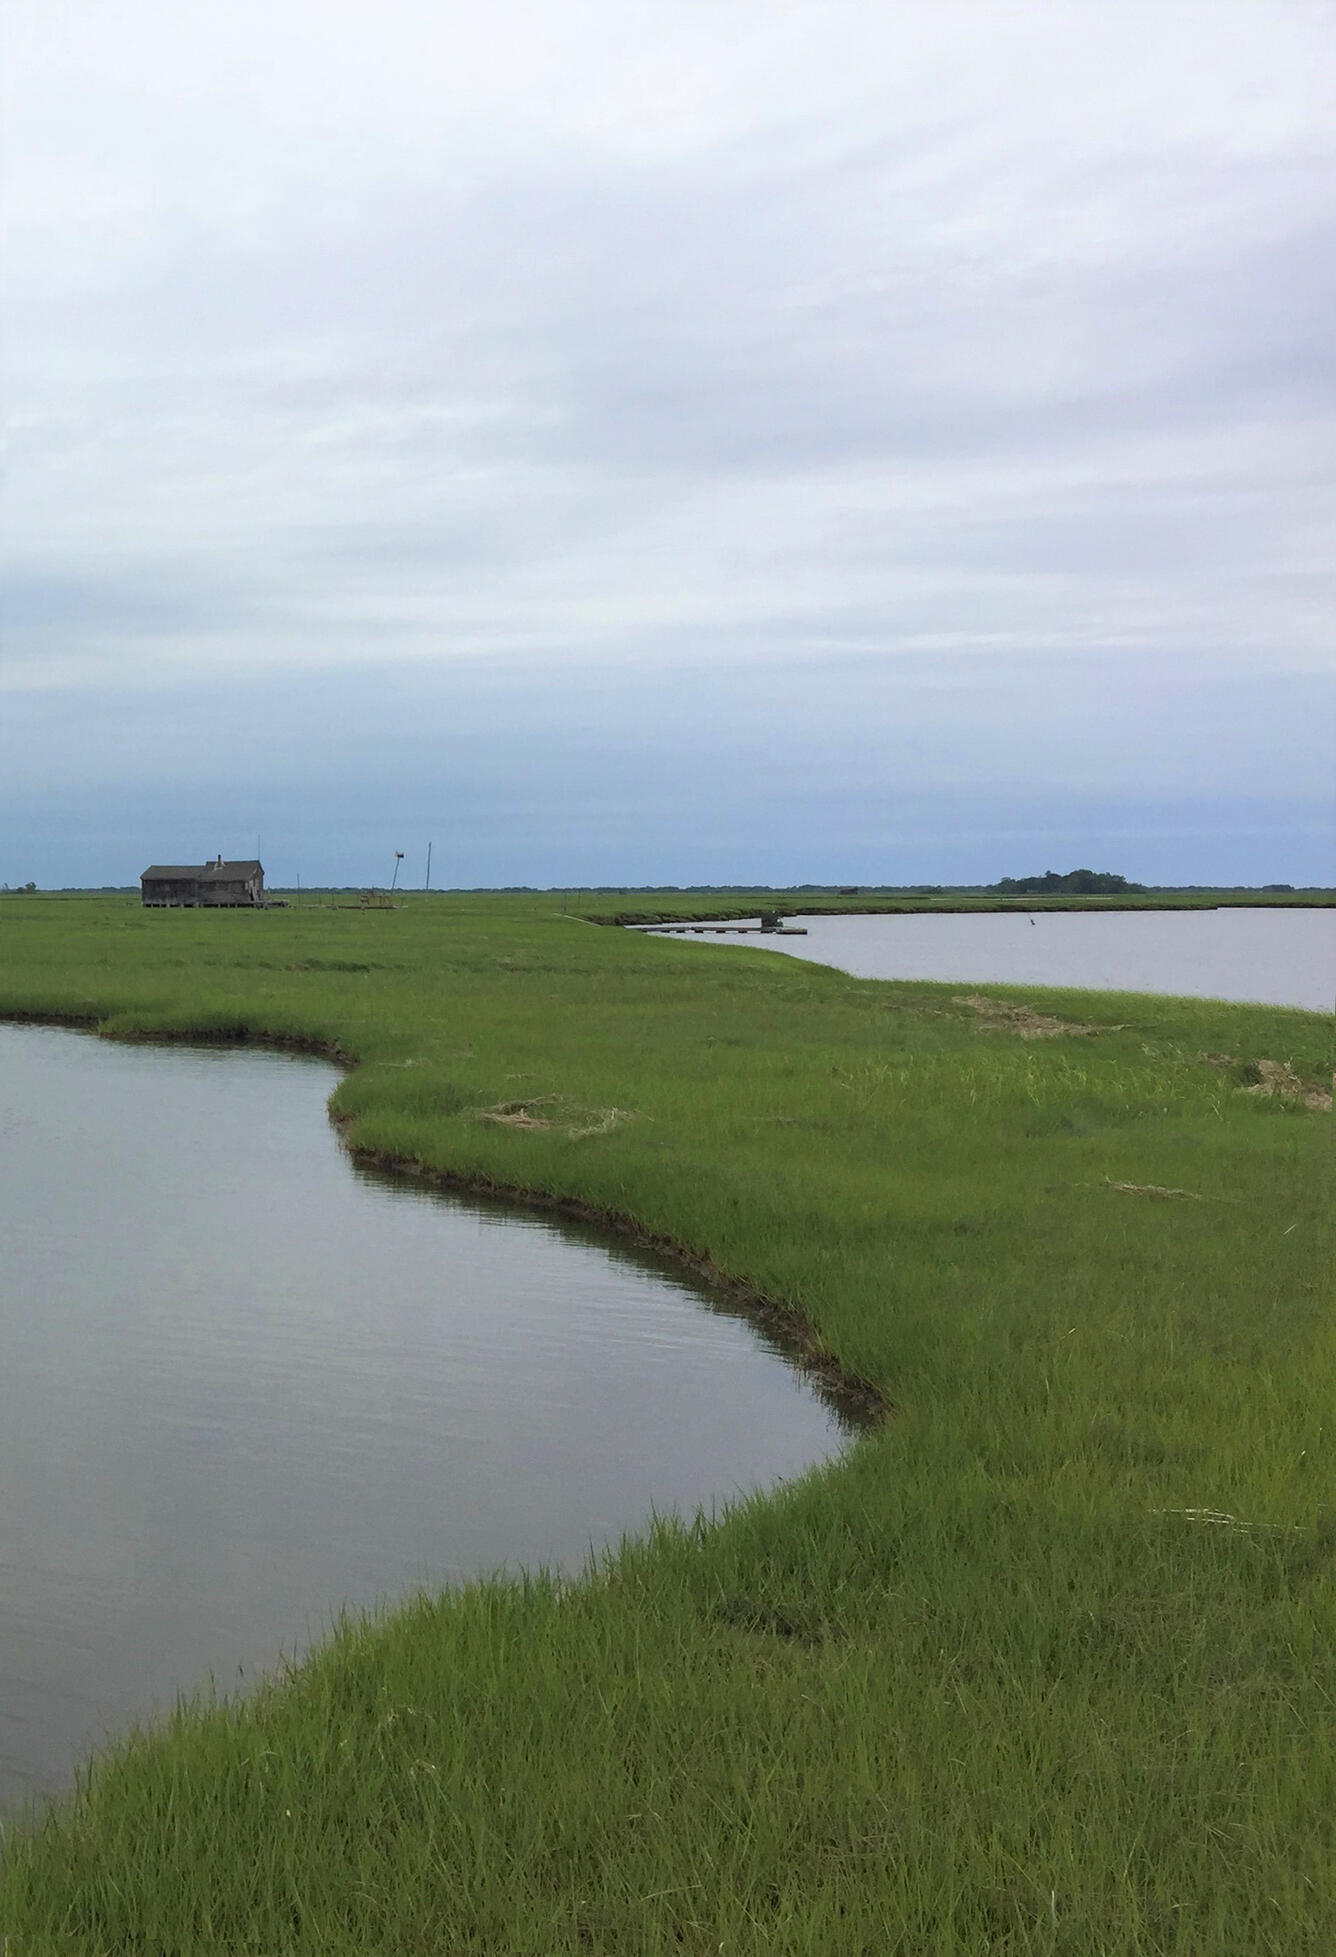 Grassy marsh area meandering toward the background with two bodies of water on either side.